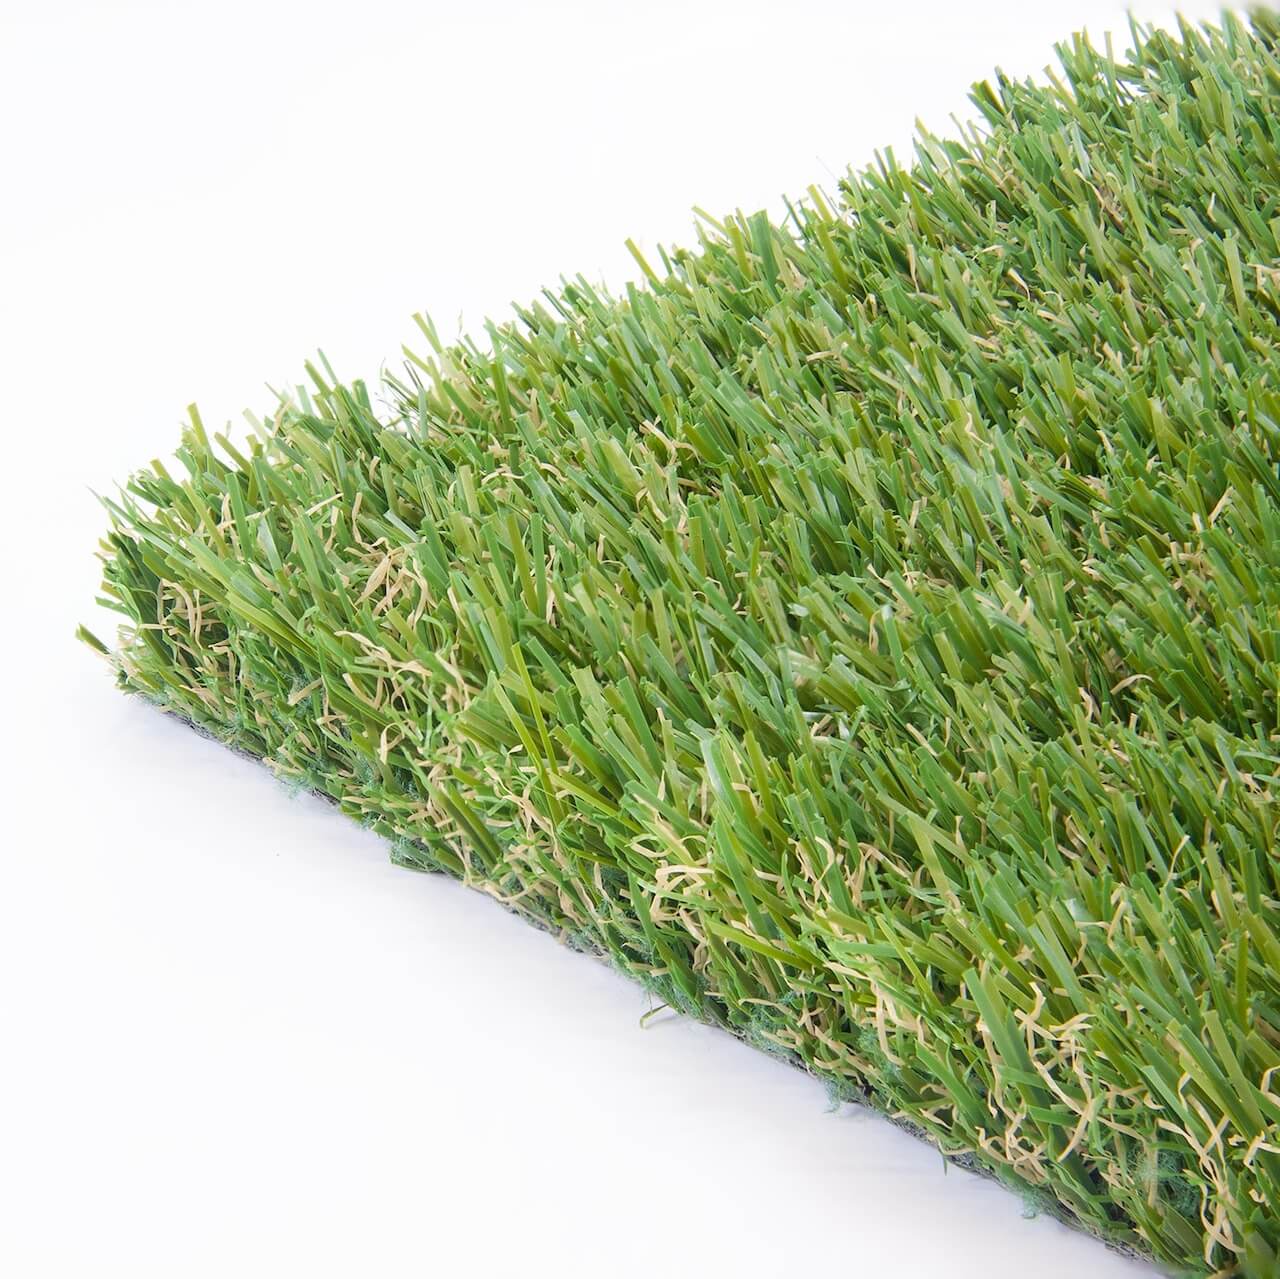 SYNLawn Cool Plus Synthetic Turf Classic Summer 30mm - Online Flooring Store